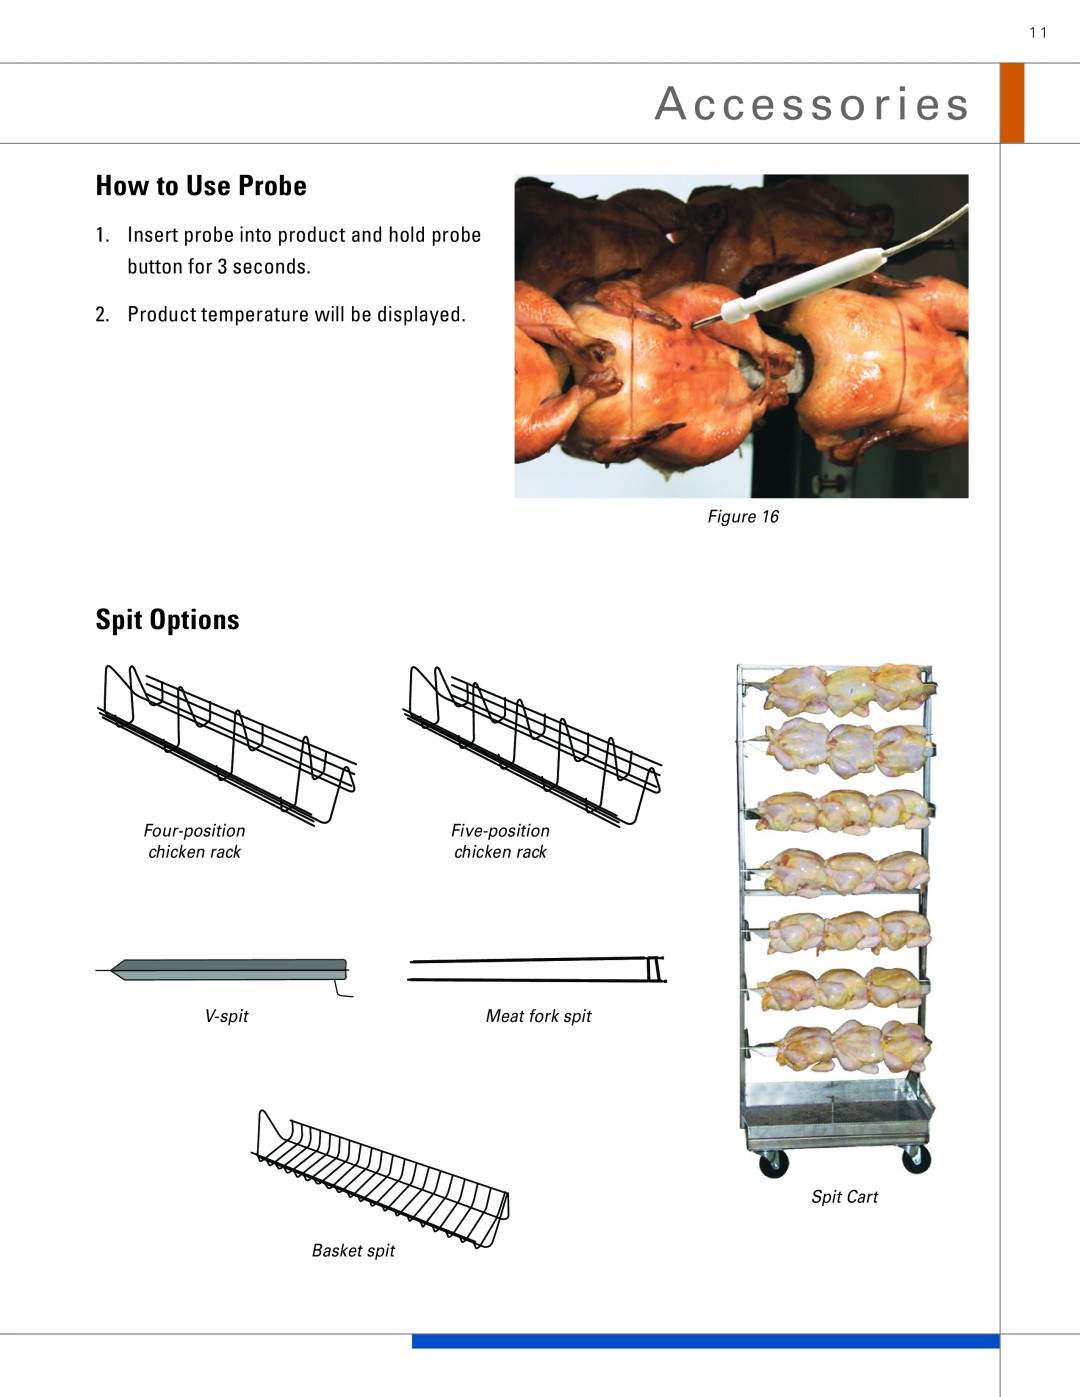 Hobart KA7E A c c e s s o r i e s, How to Use Probe, Spit Options, Four-position chicken rack, Five-position chicken rack 